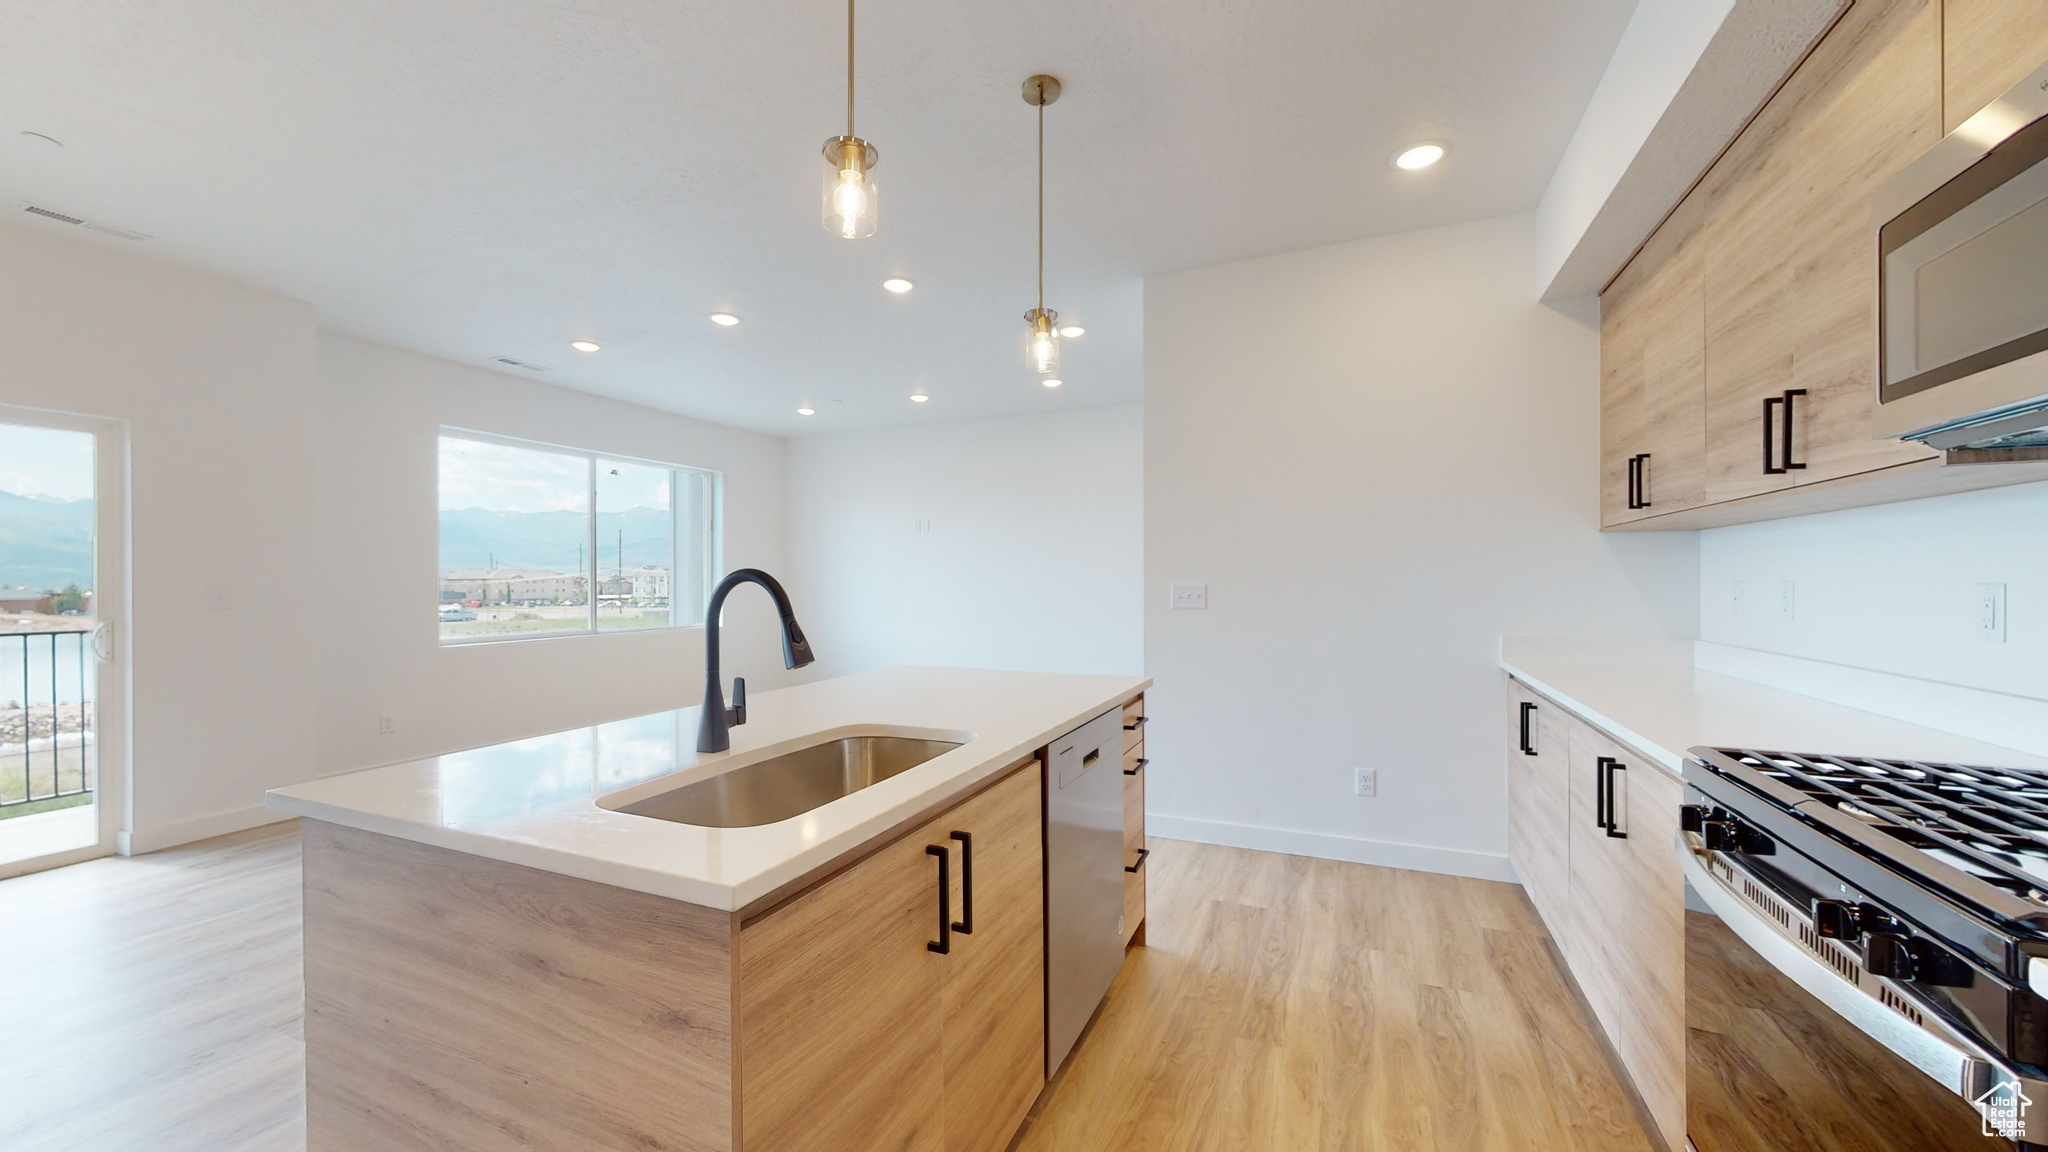 Kitchen with sink, plenty of natural light, light wood-type flooring, and pendant lighting